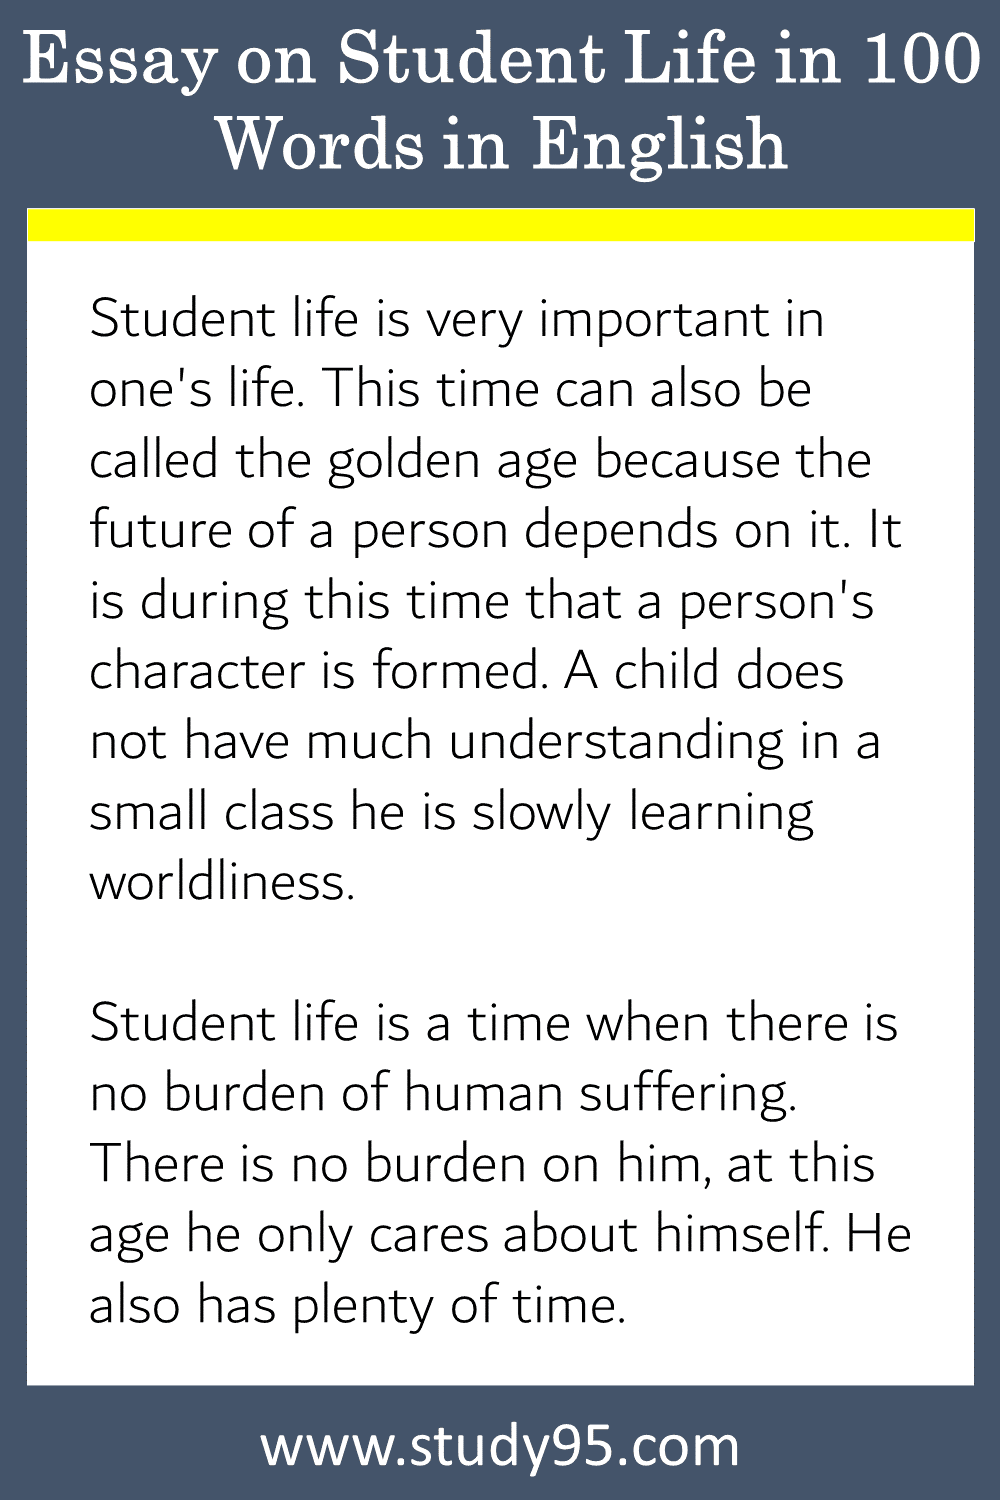 Essay on Student Life in 100 Words